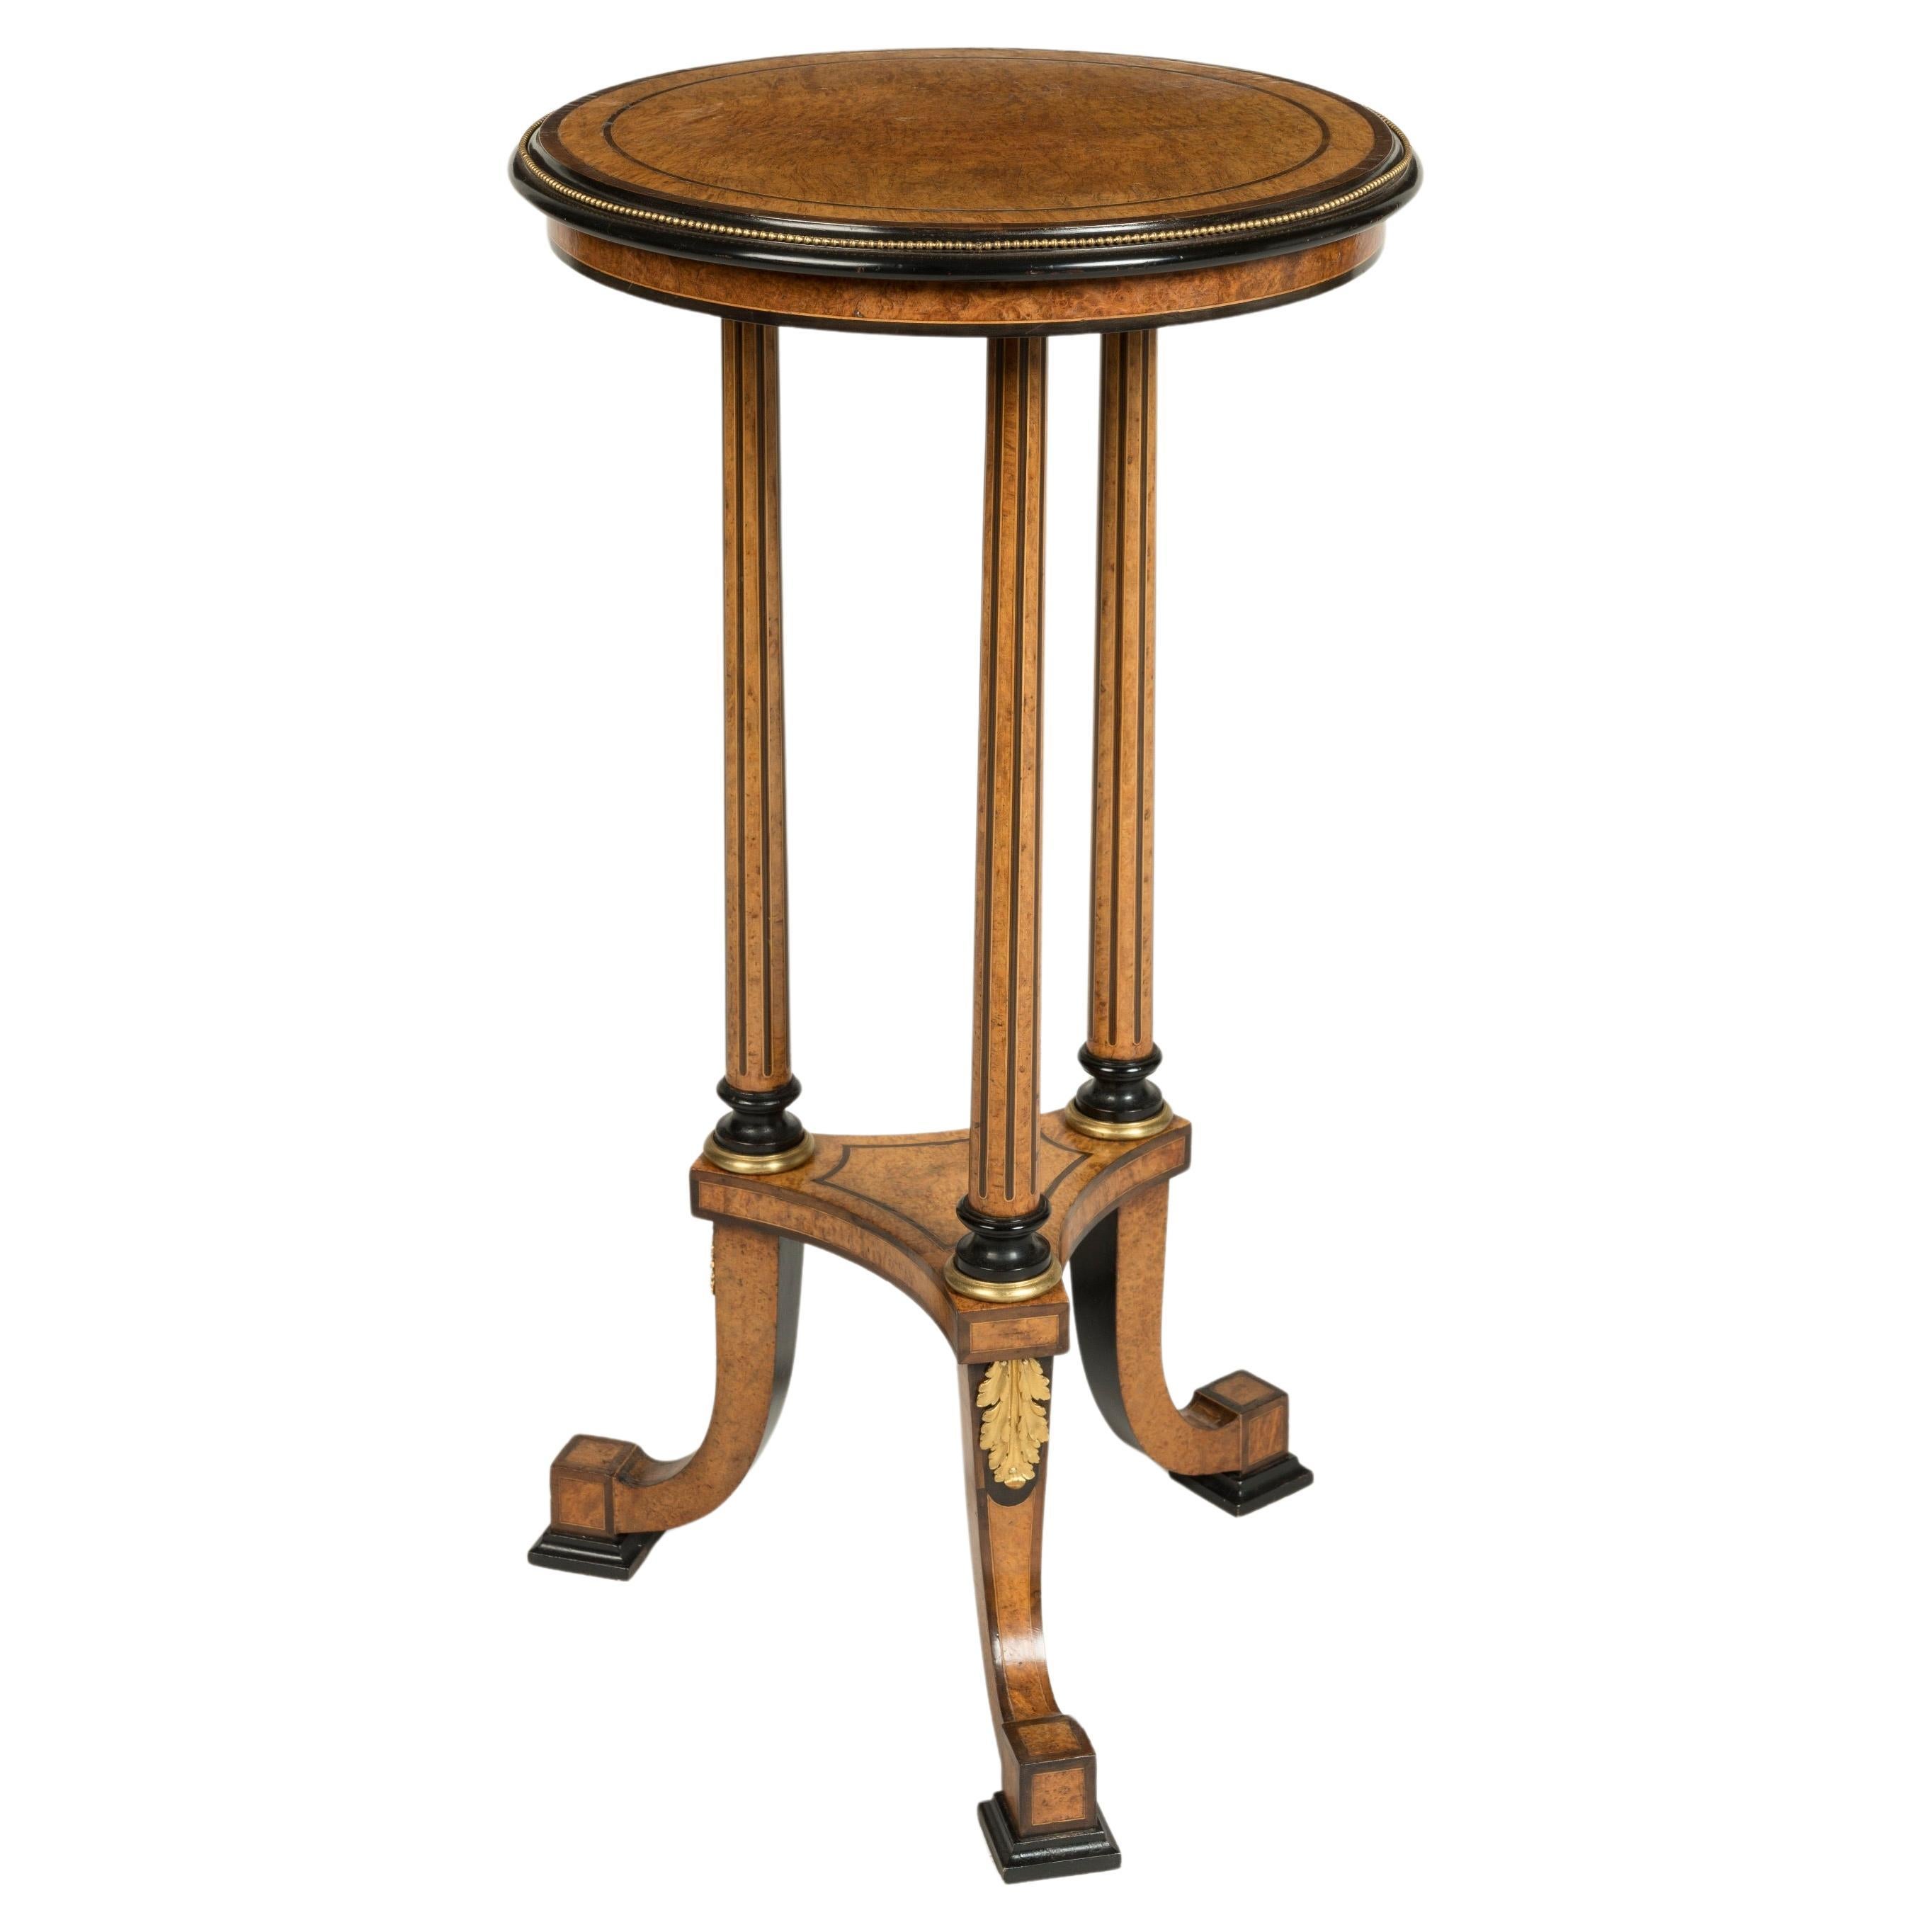 19th Century English Burr Walnut Tripod Table by Gregory & Co of London For Sale